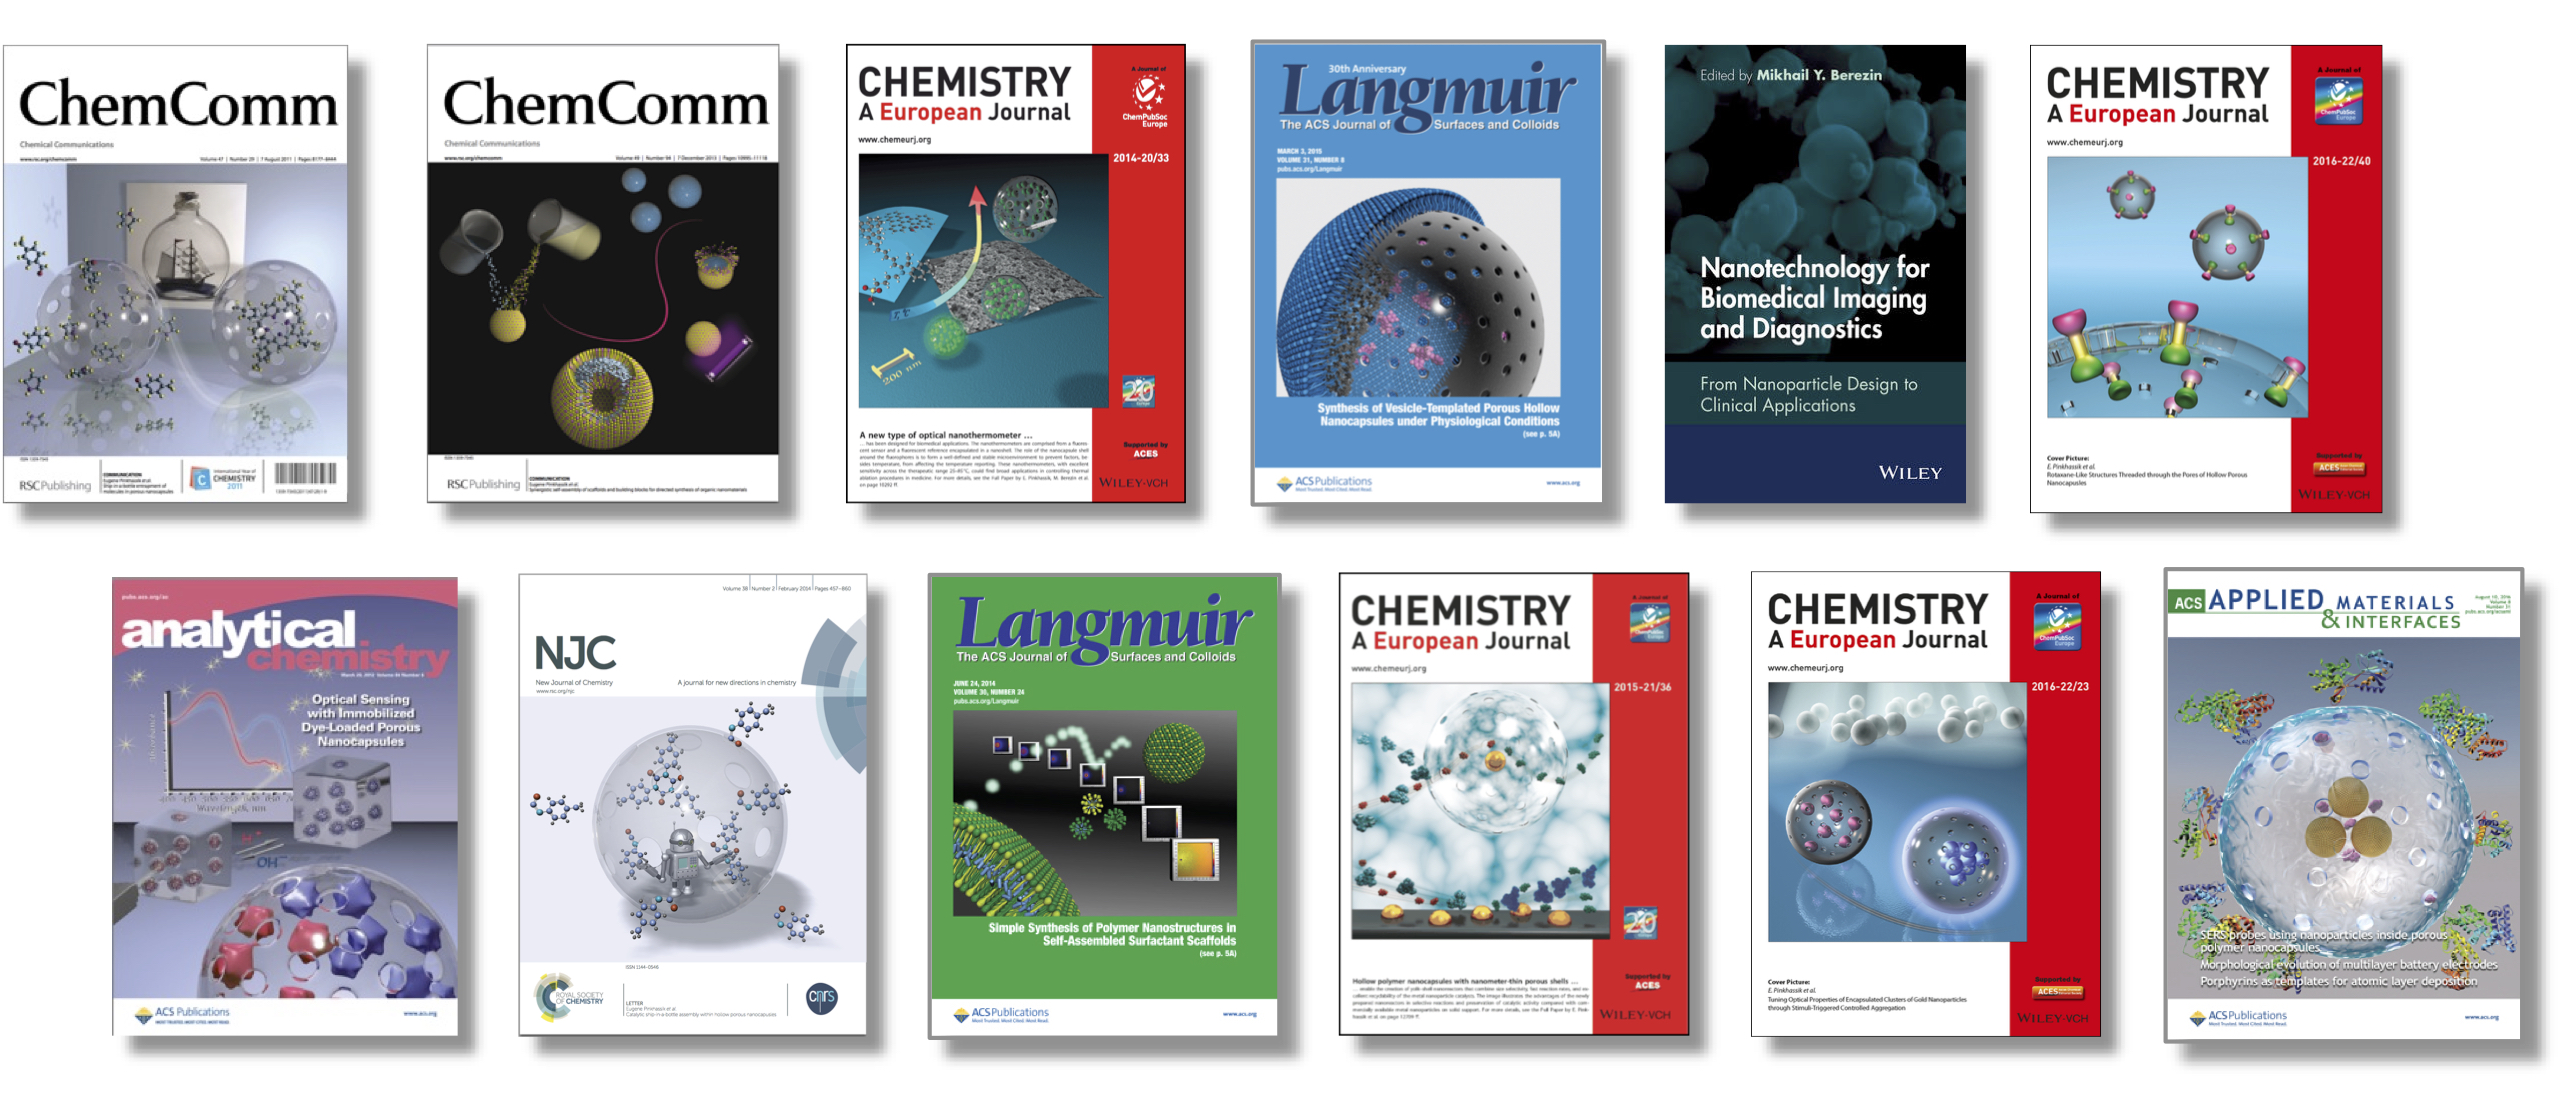 Journal covers featuring work of the Pinkhassik group